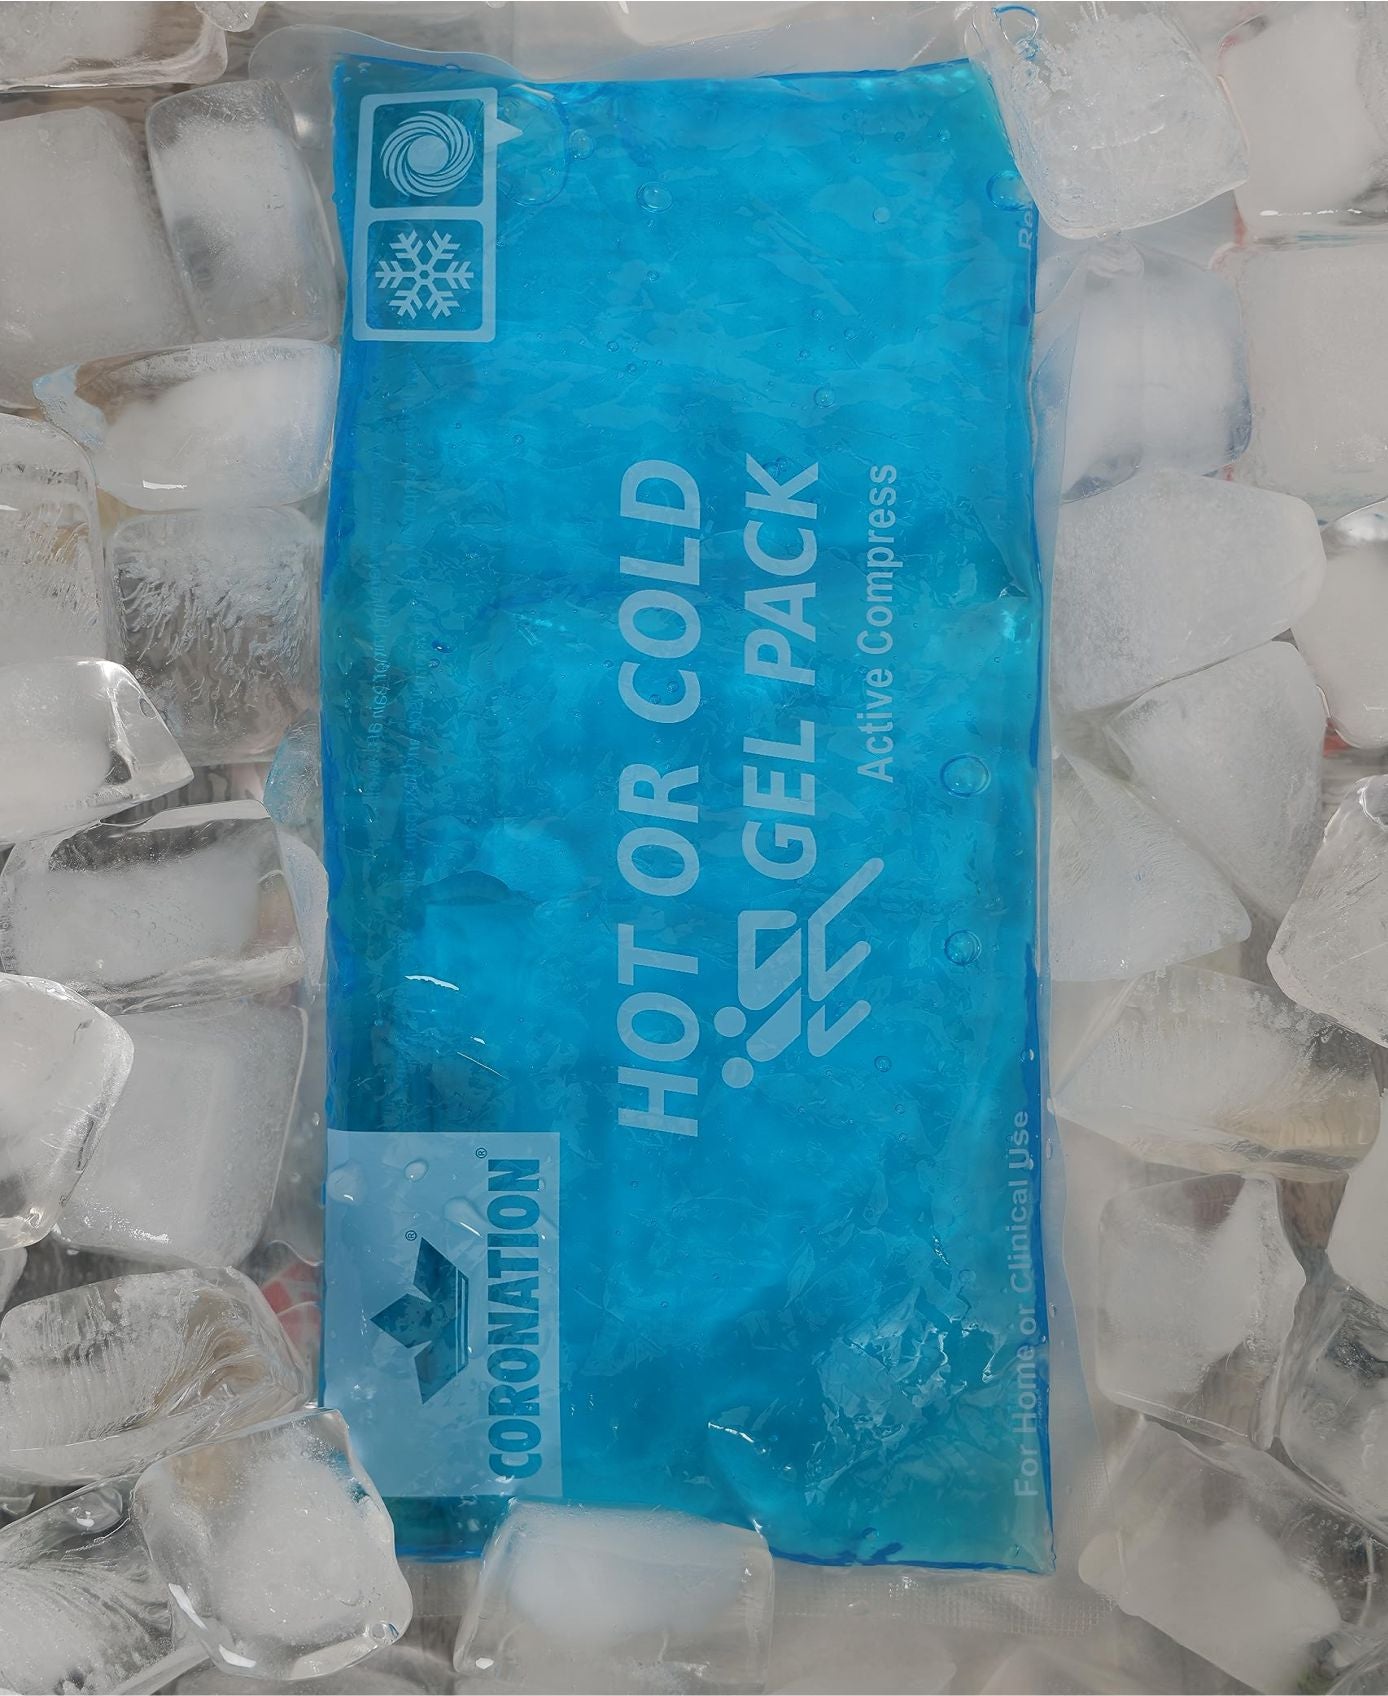 Coronation Hot & Cold Gel Pack - Active Compress